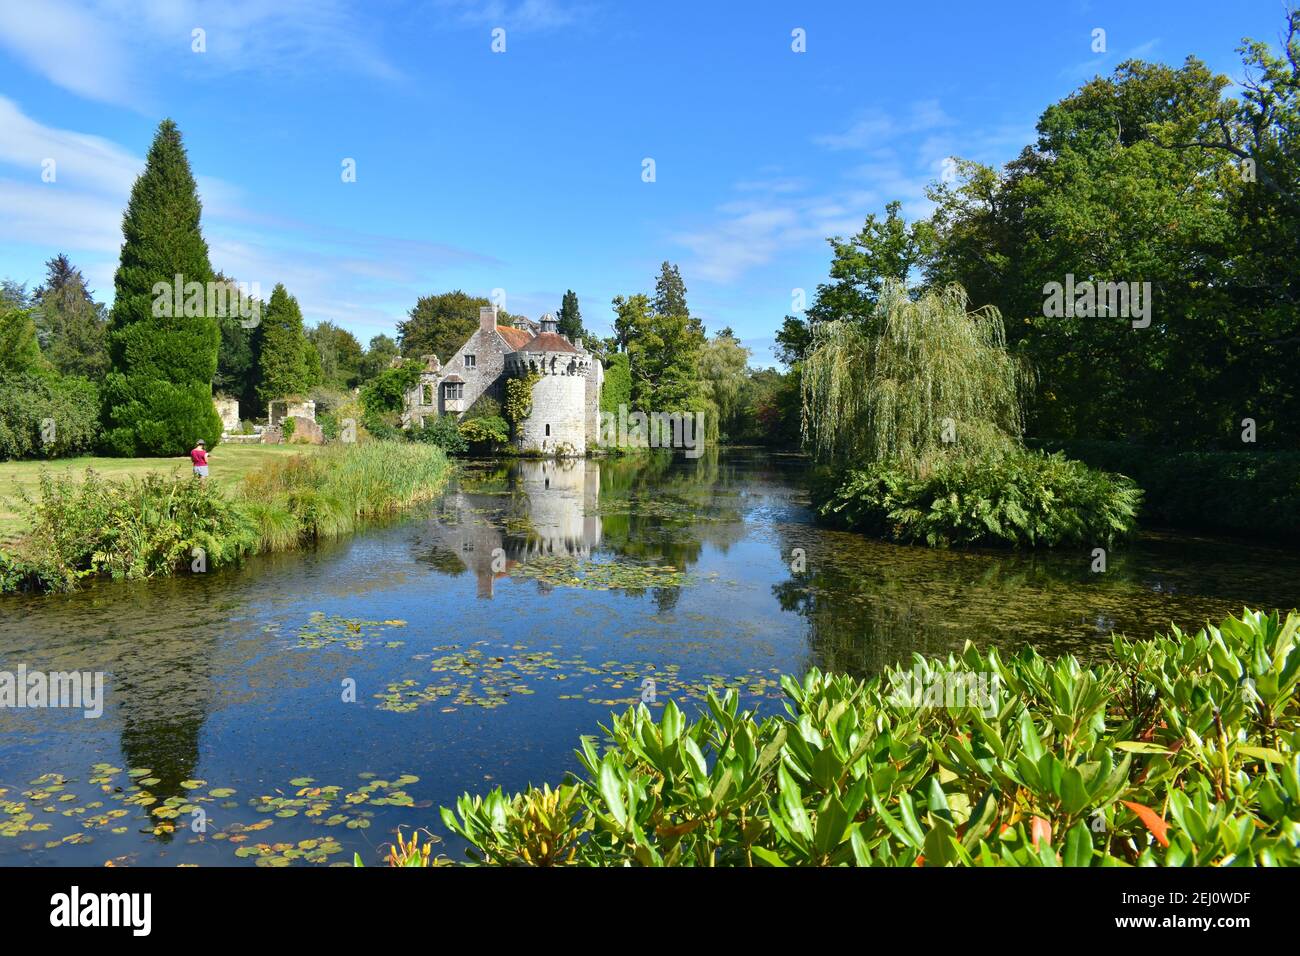 Woman drawing a medieval castle and its reflection in water Romantic gardens with panoramic views of a moated fortress and a Victorian country mansion Stock Photo